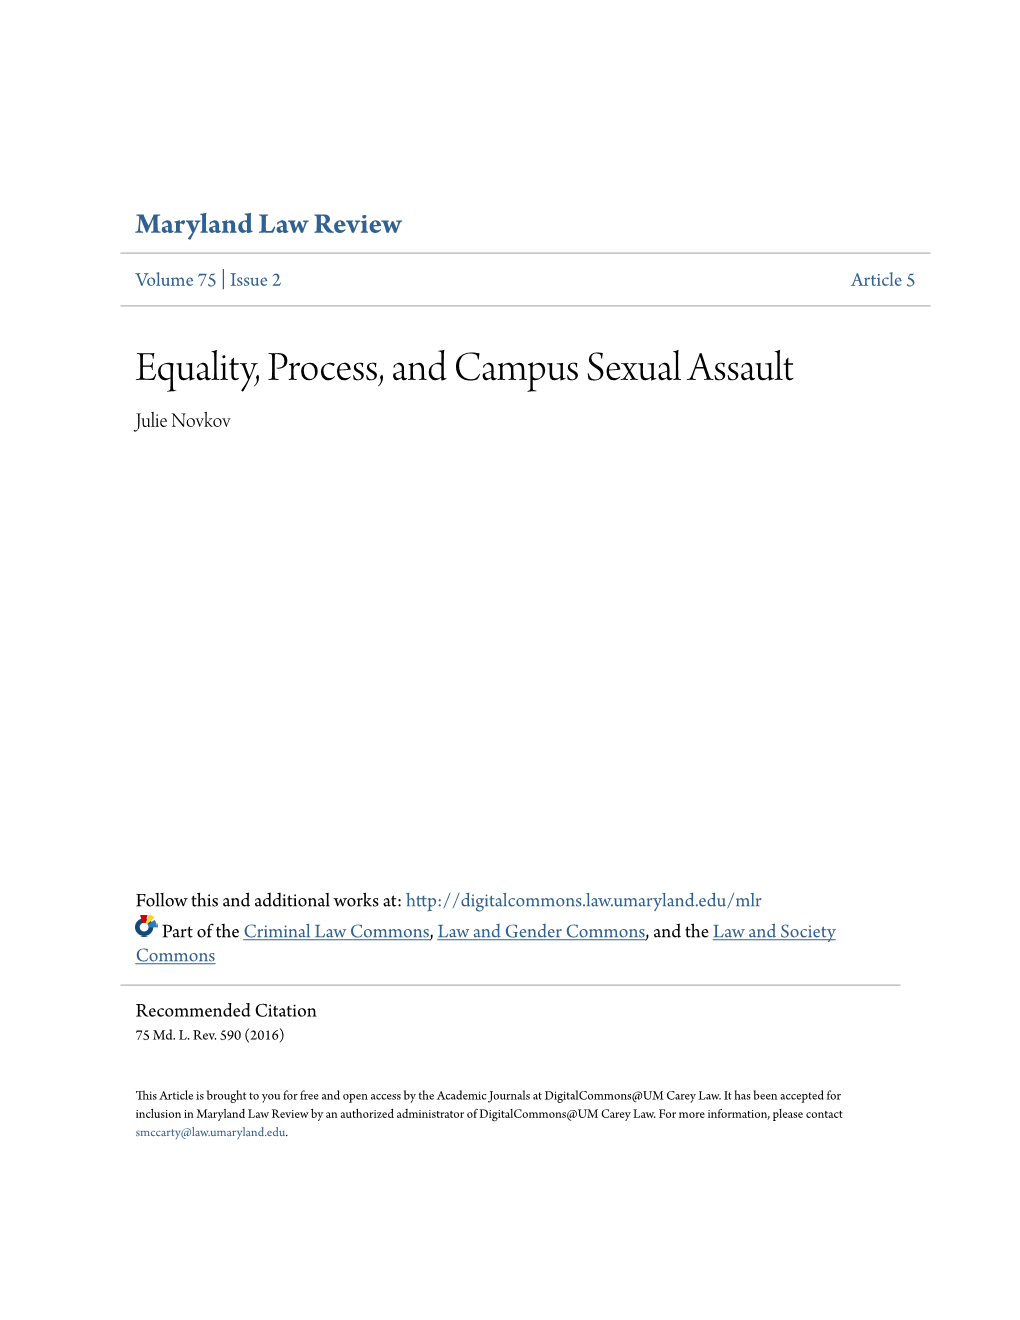 Equality, Process, and Campus Sexual Assault Julie Novkov